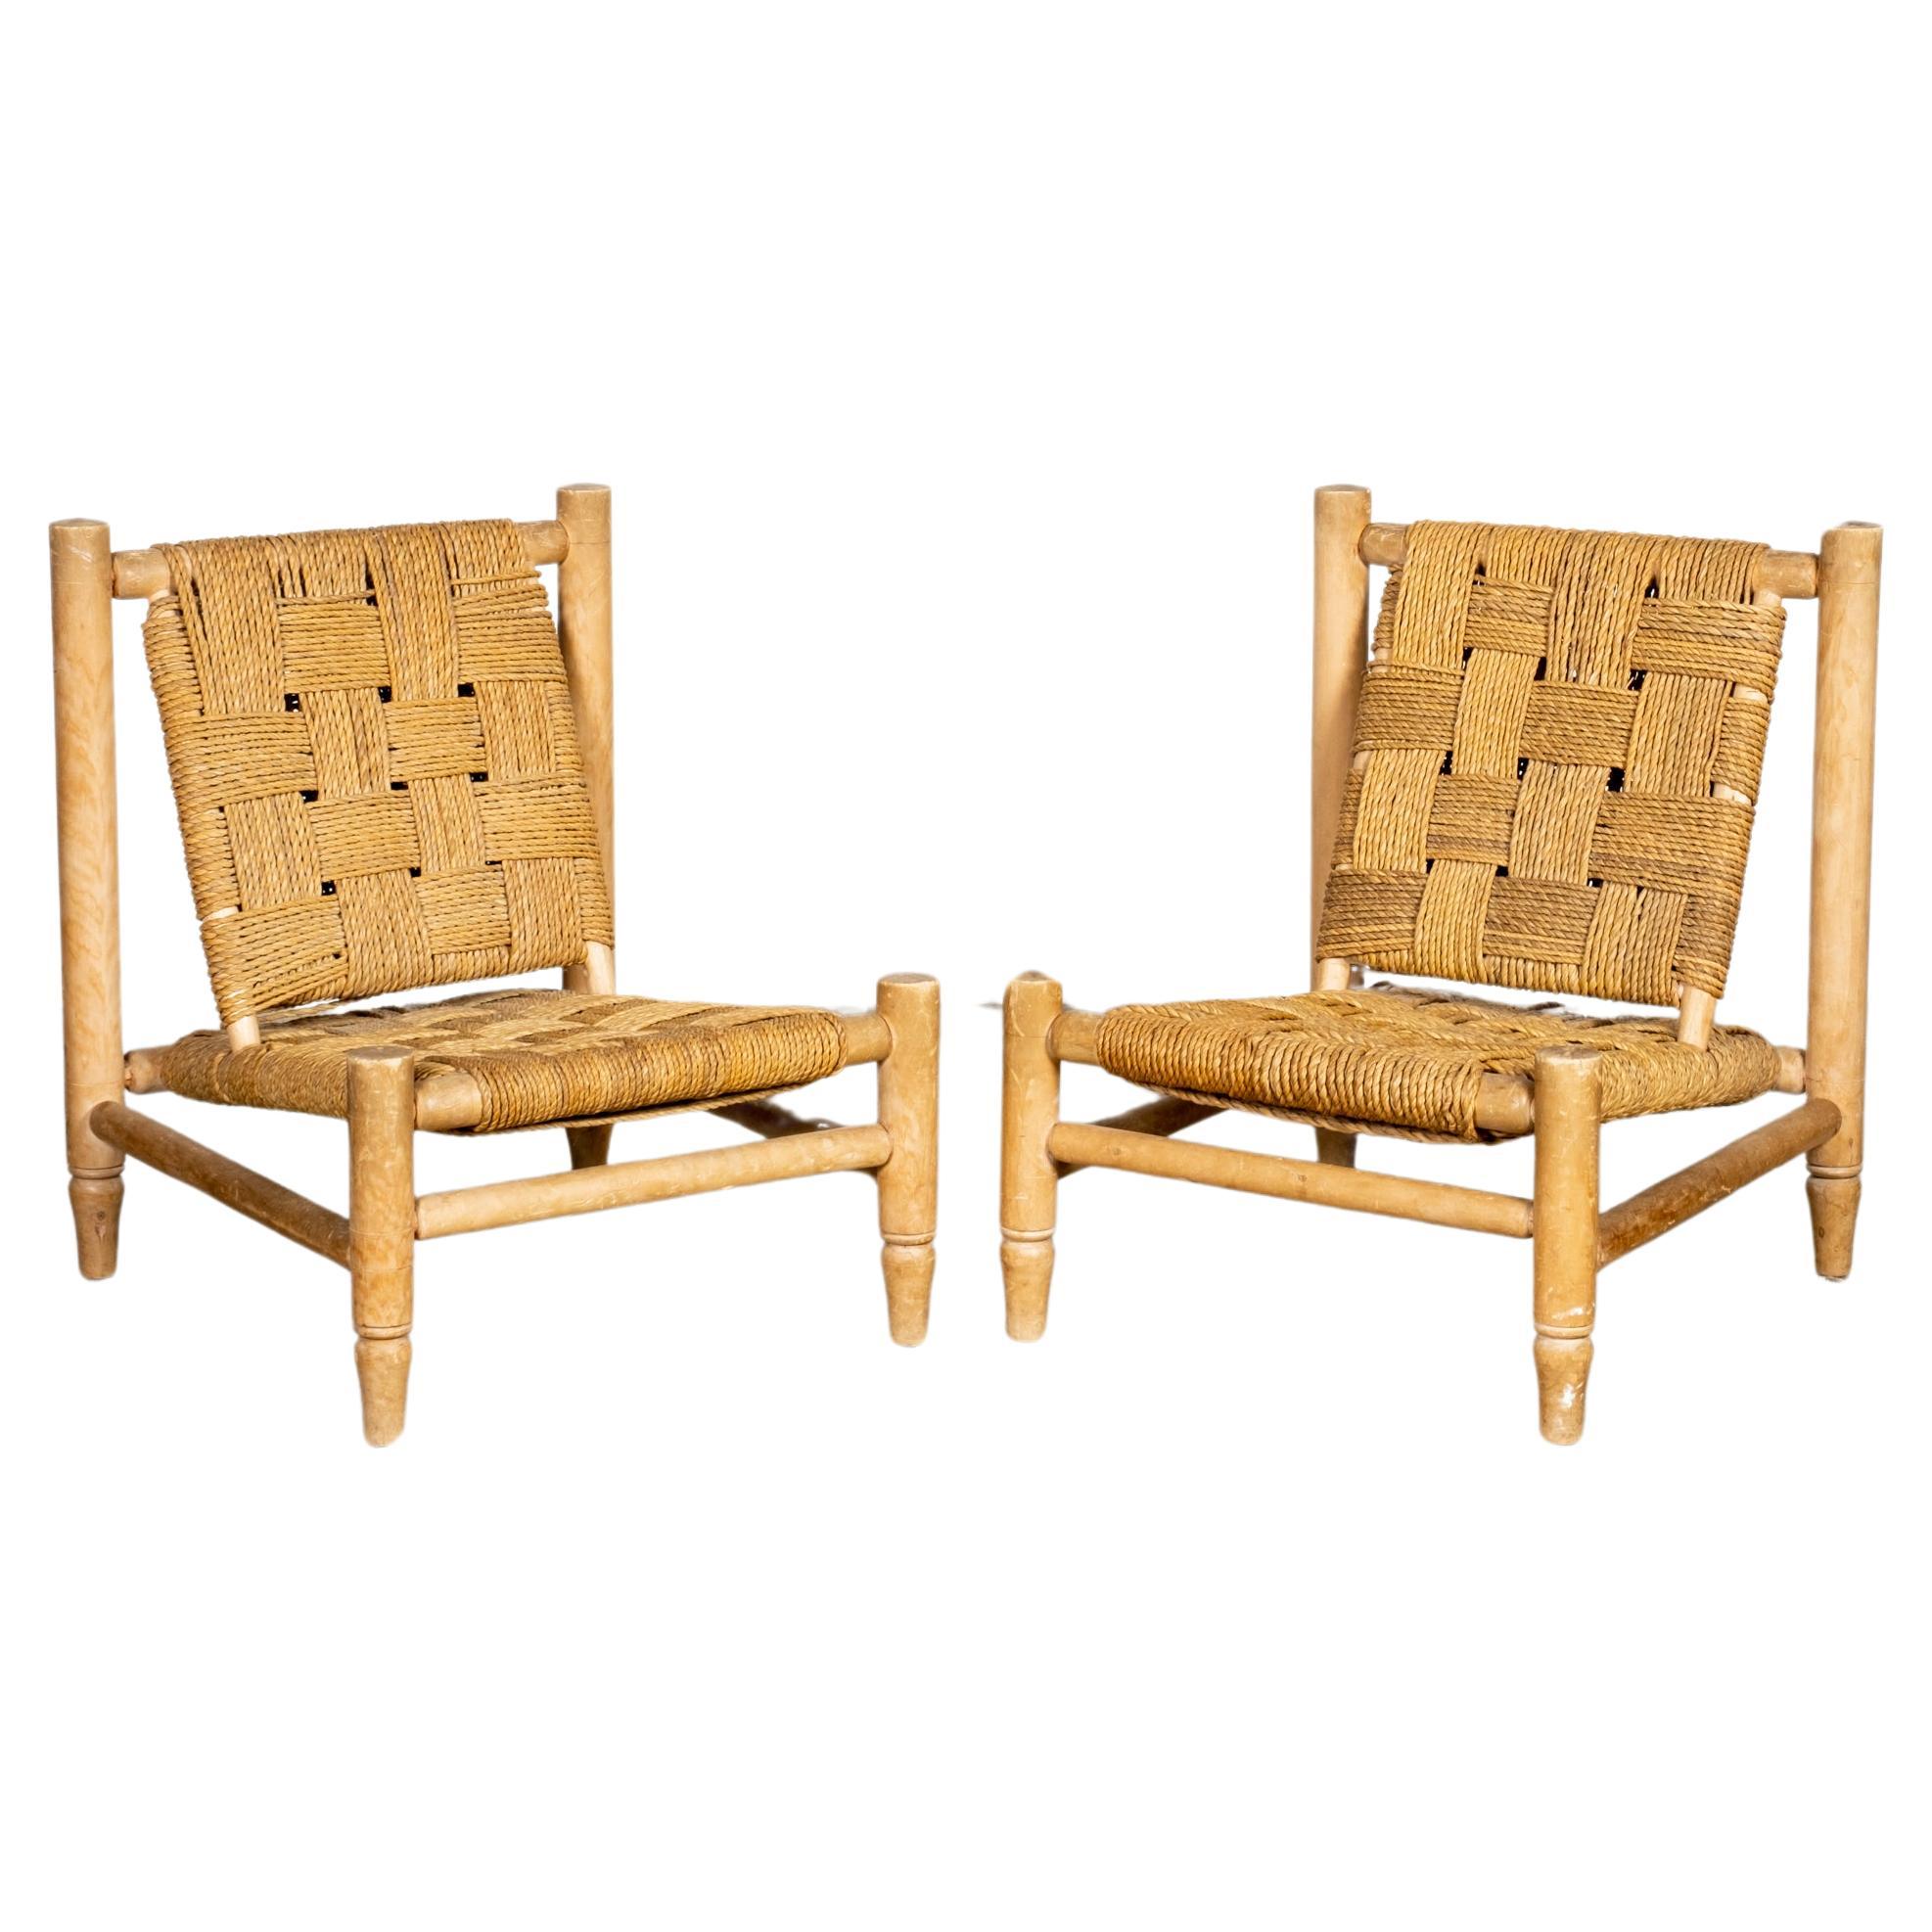 Pair of 1950s Wood and Woven Rope Lounge Chairs by Adrien Audoux & Frida Minet